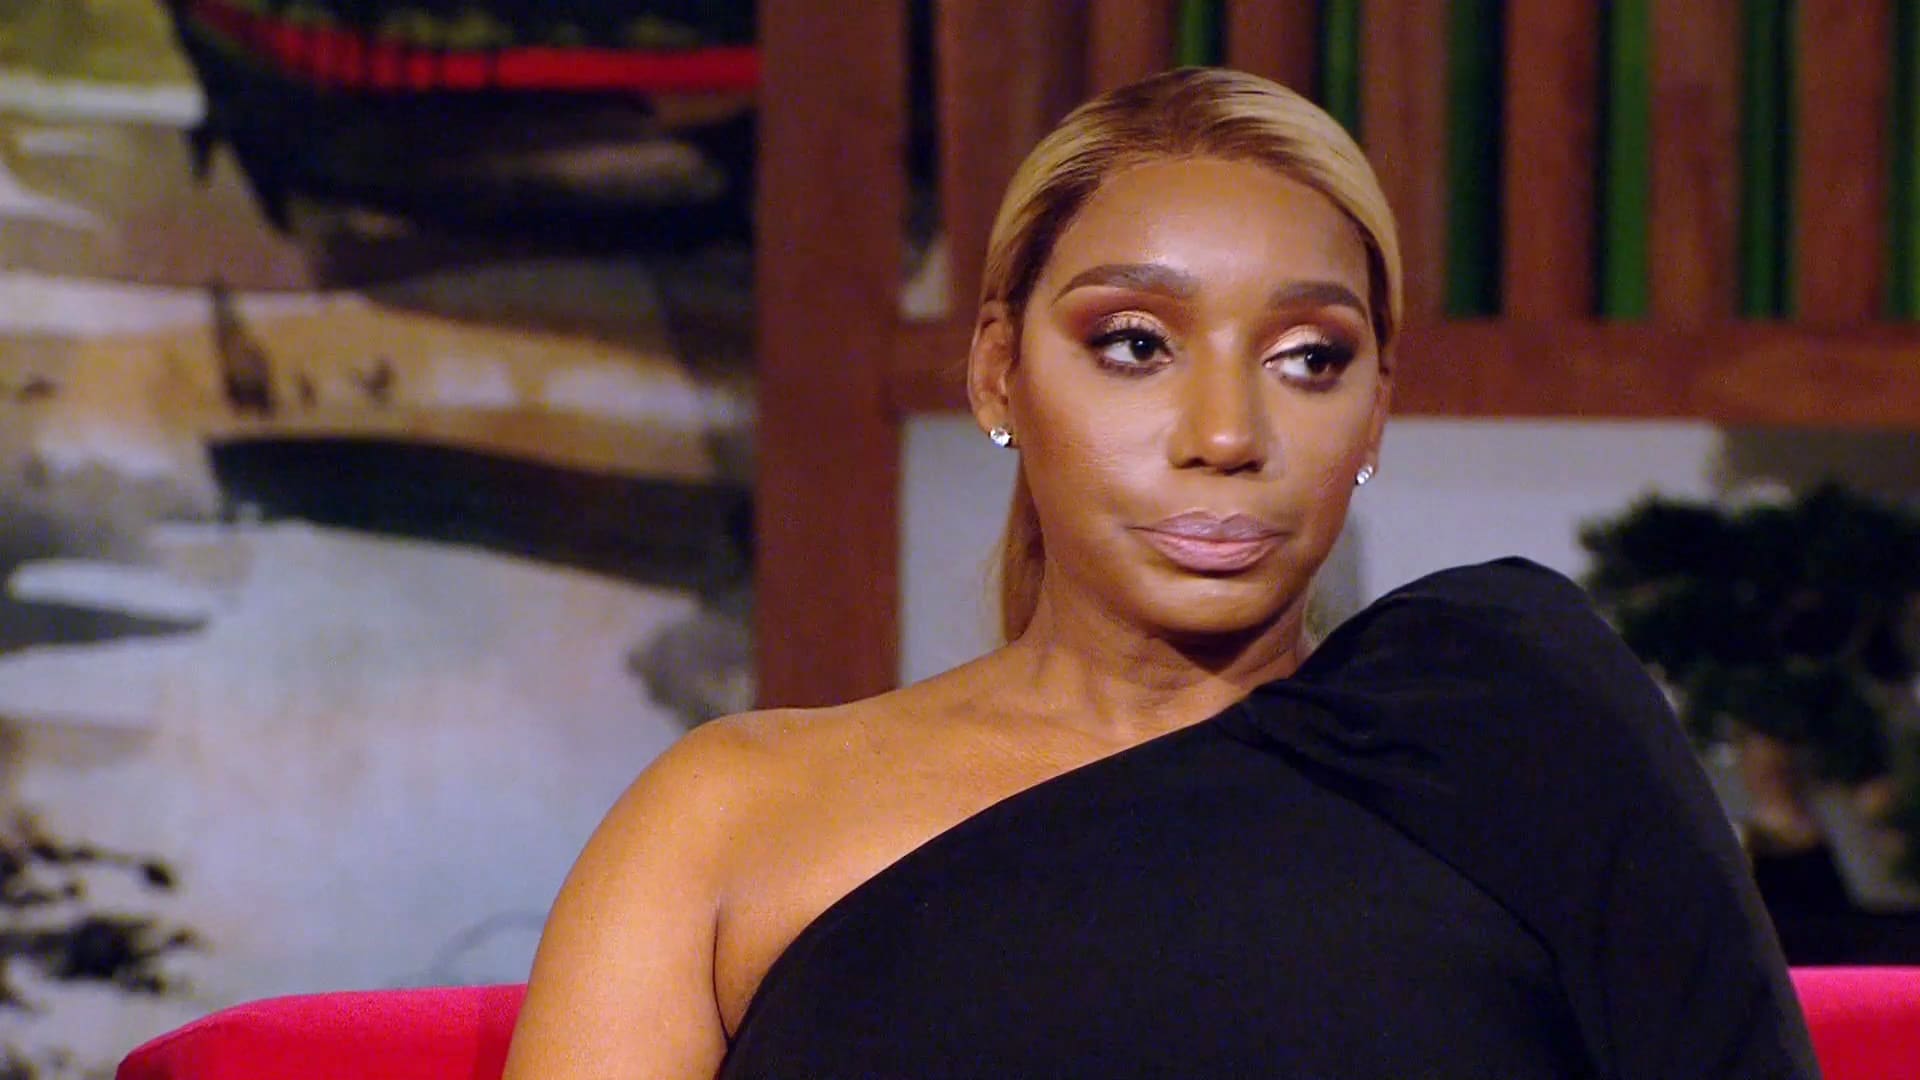 ”nene-leakes-mourns-the-death-of-john-singleton-with-an-emotional-message”